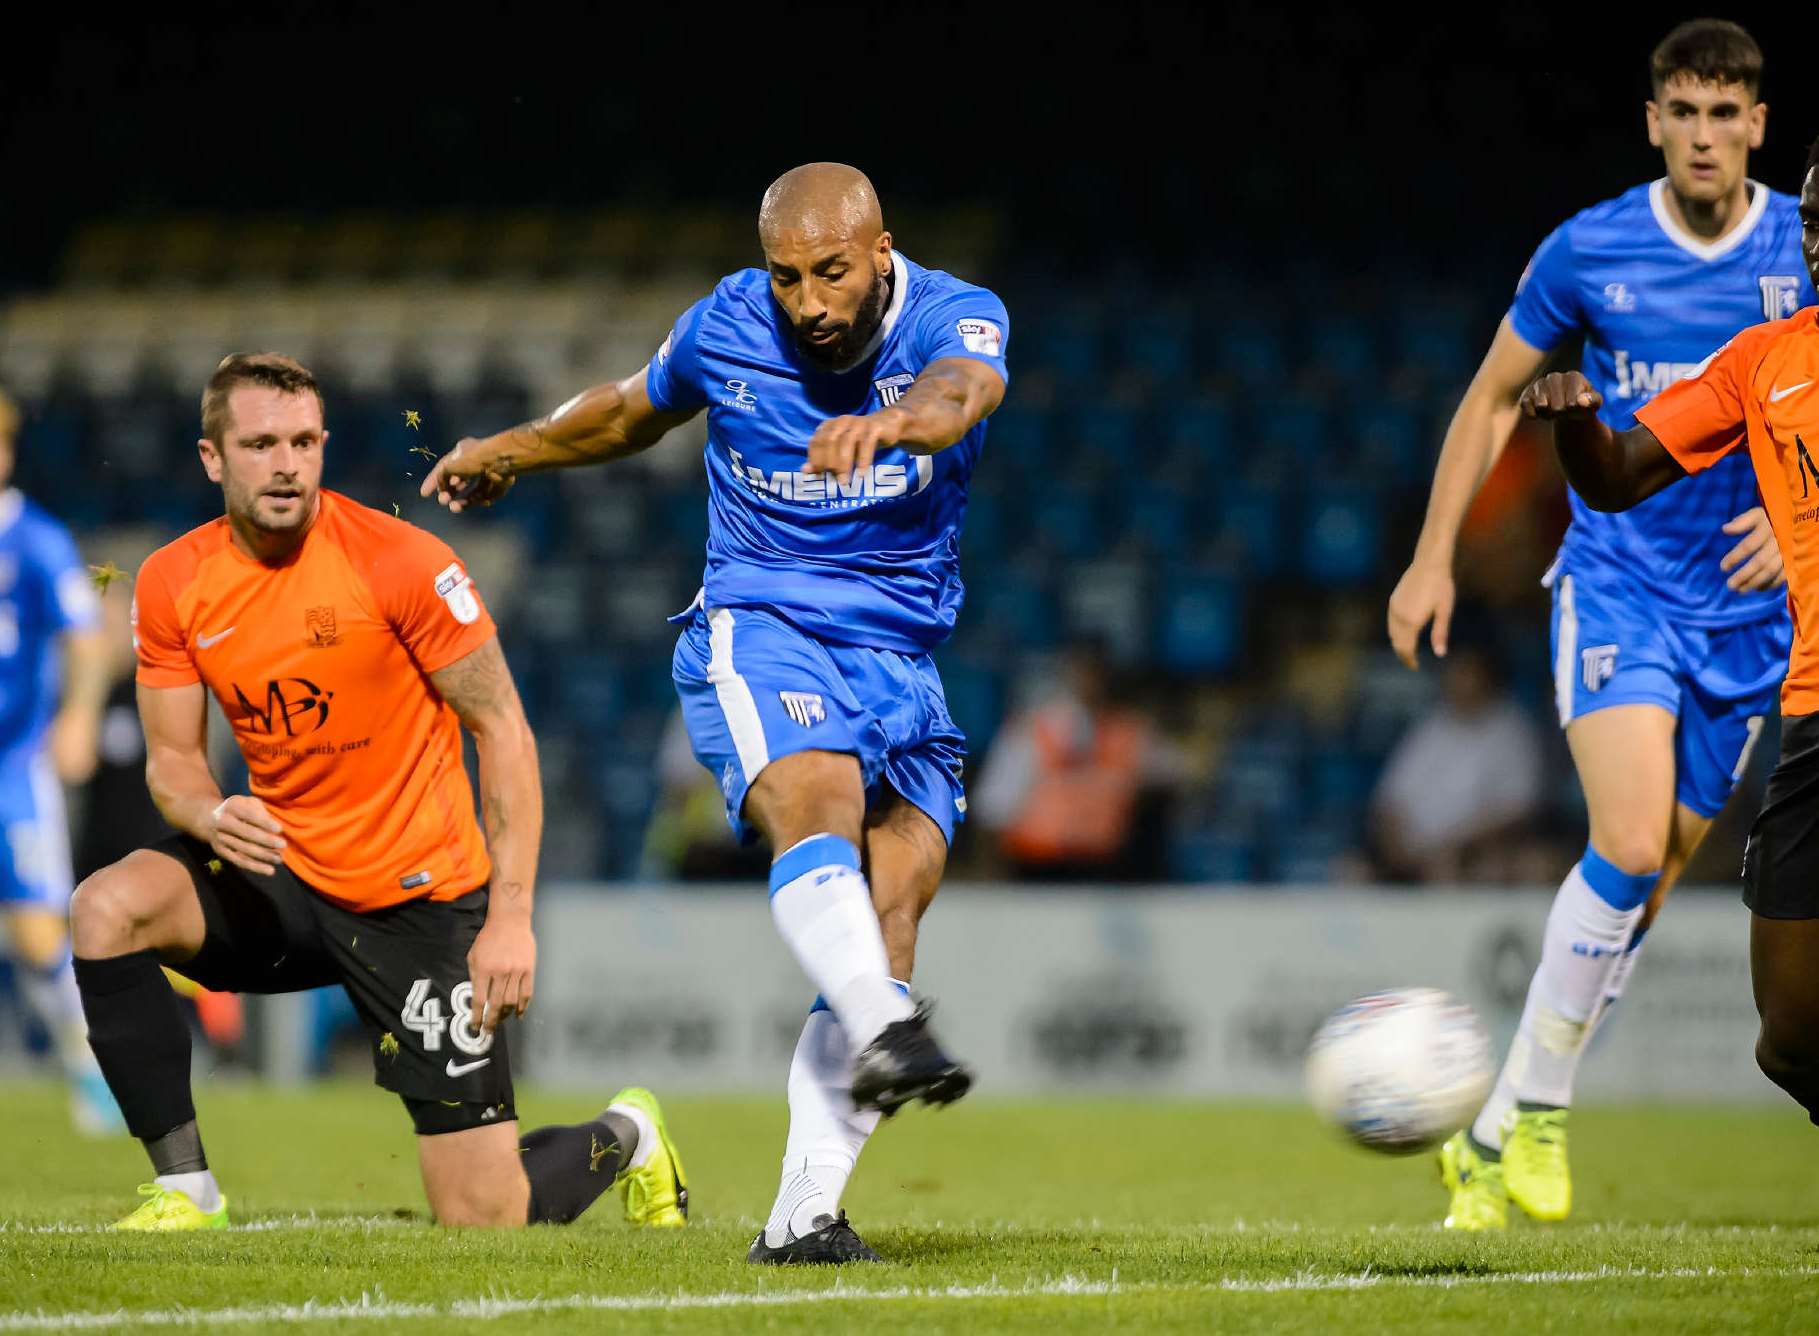 Josh Parker fires home the opening goal for Gillingham Picture: Andy Payton